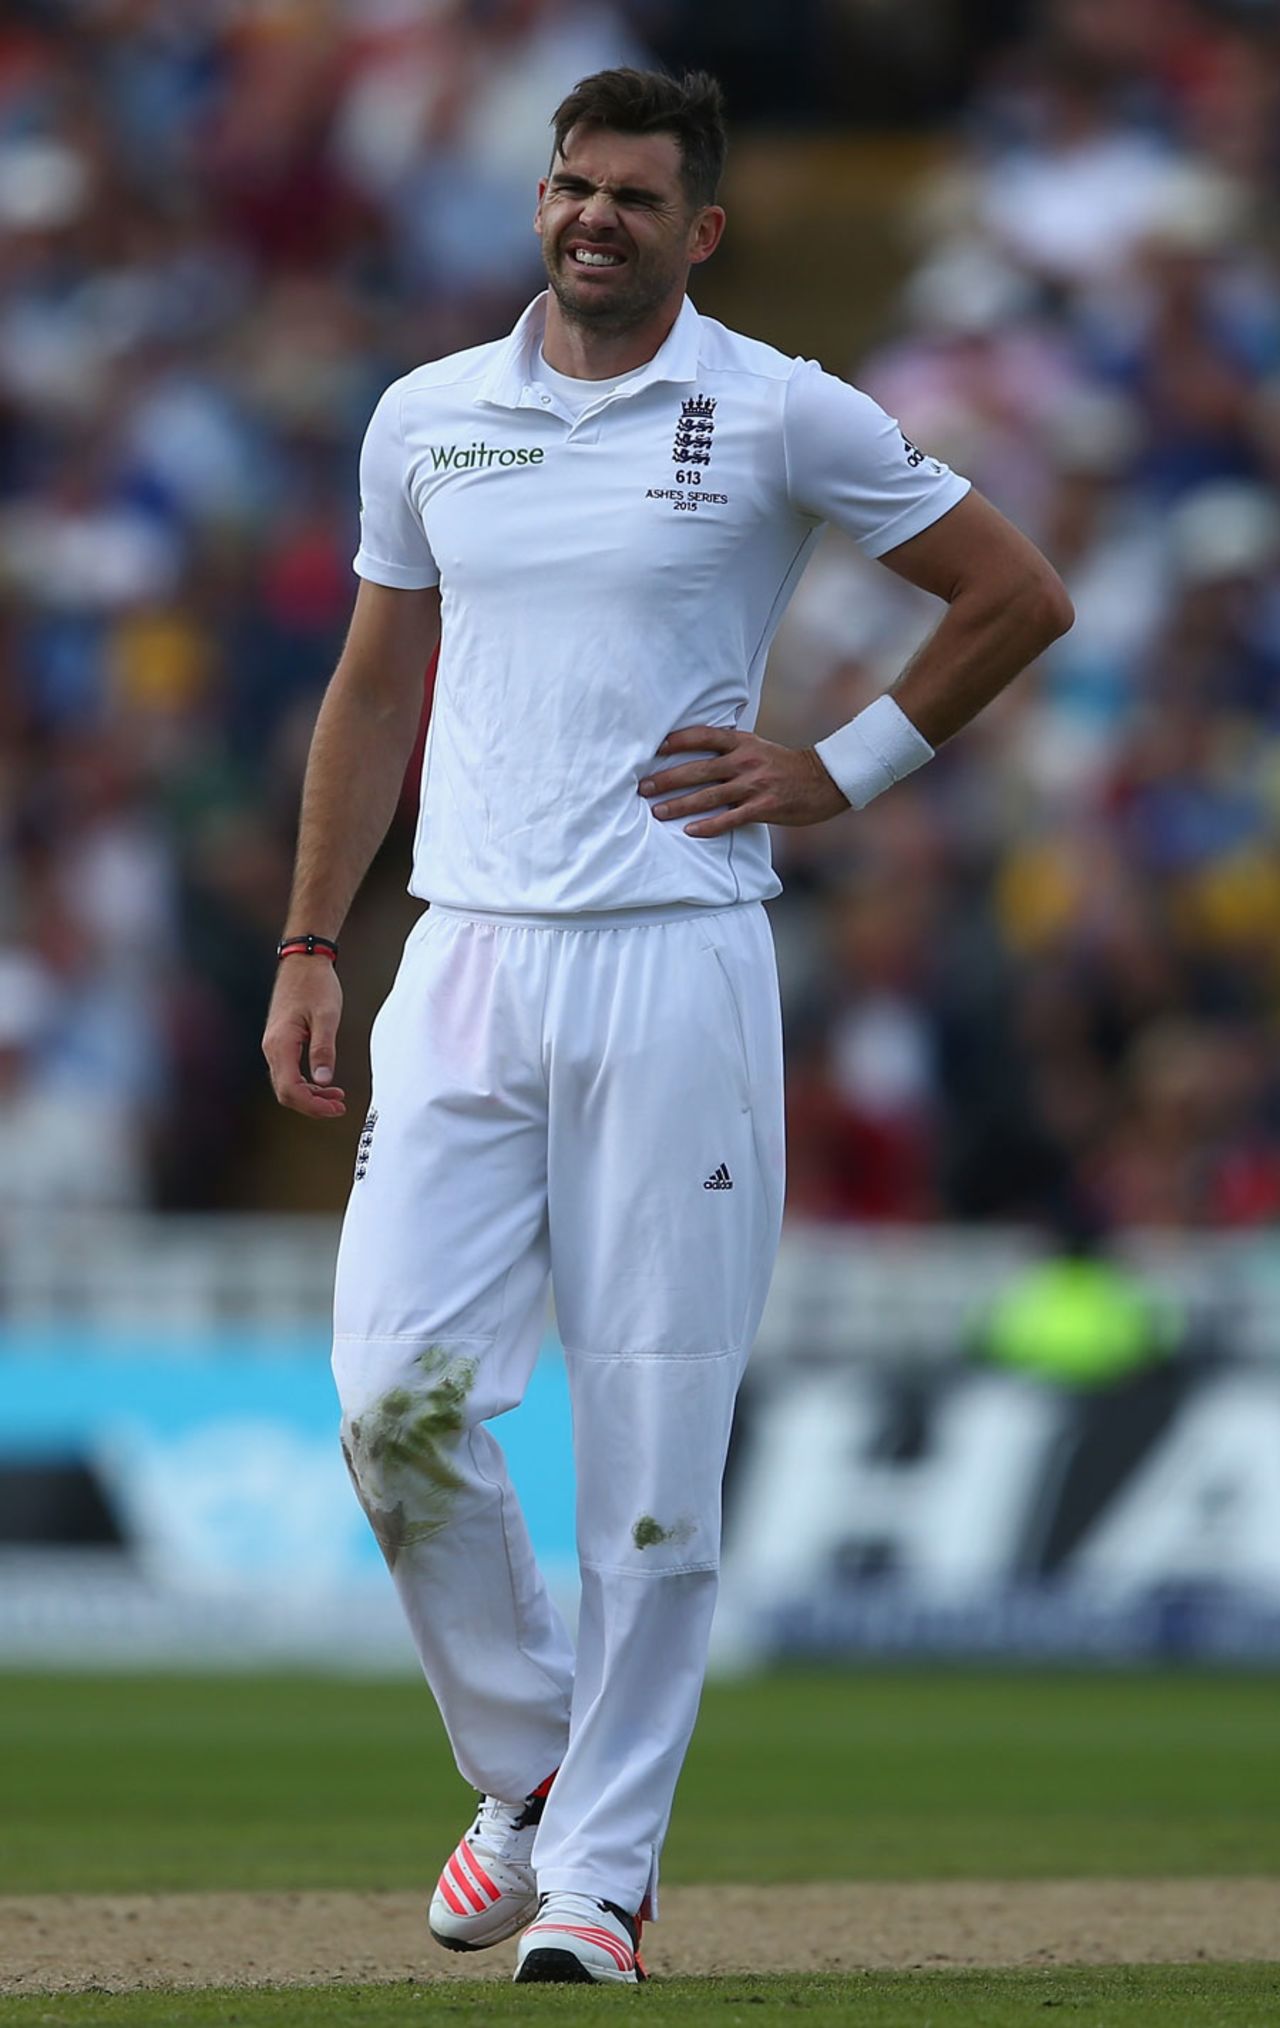 James Anderson left the field after feeling his side, England v Australia, 3rd Test, Edgbaston, 2nd day, July 30, 2015